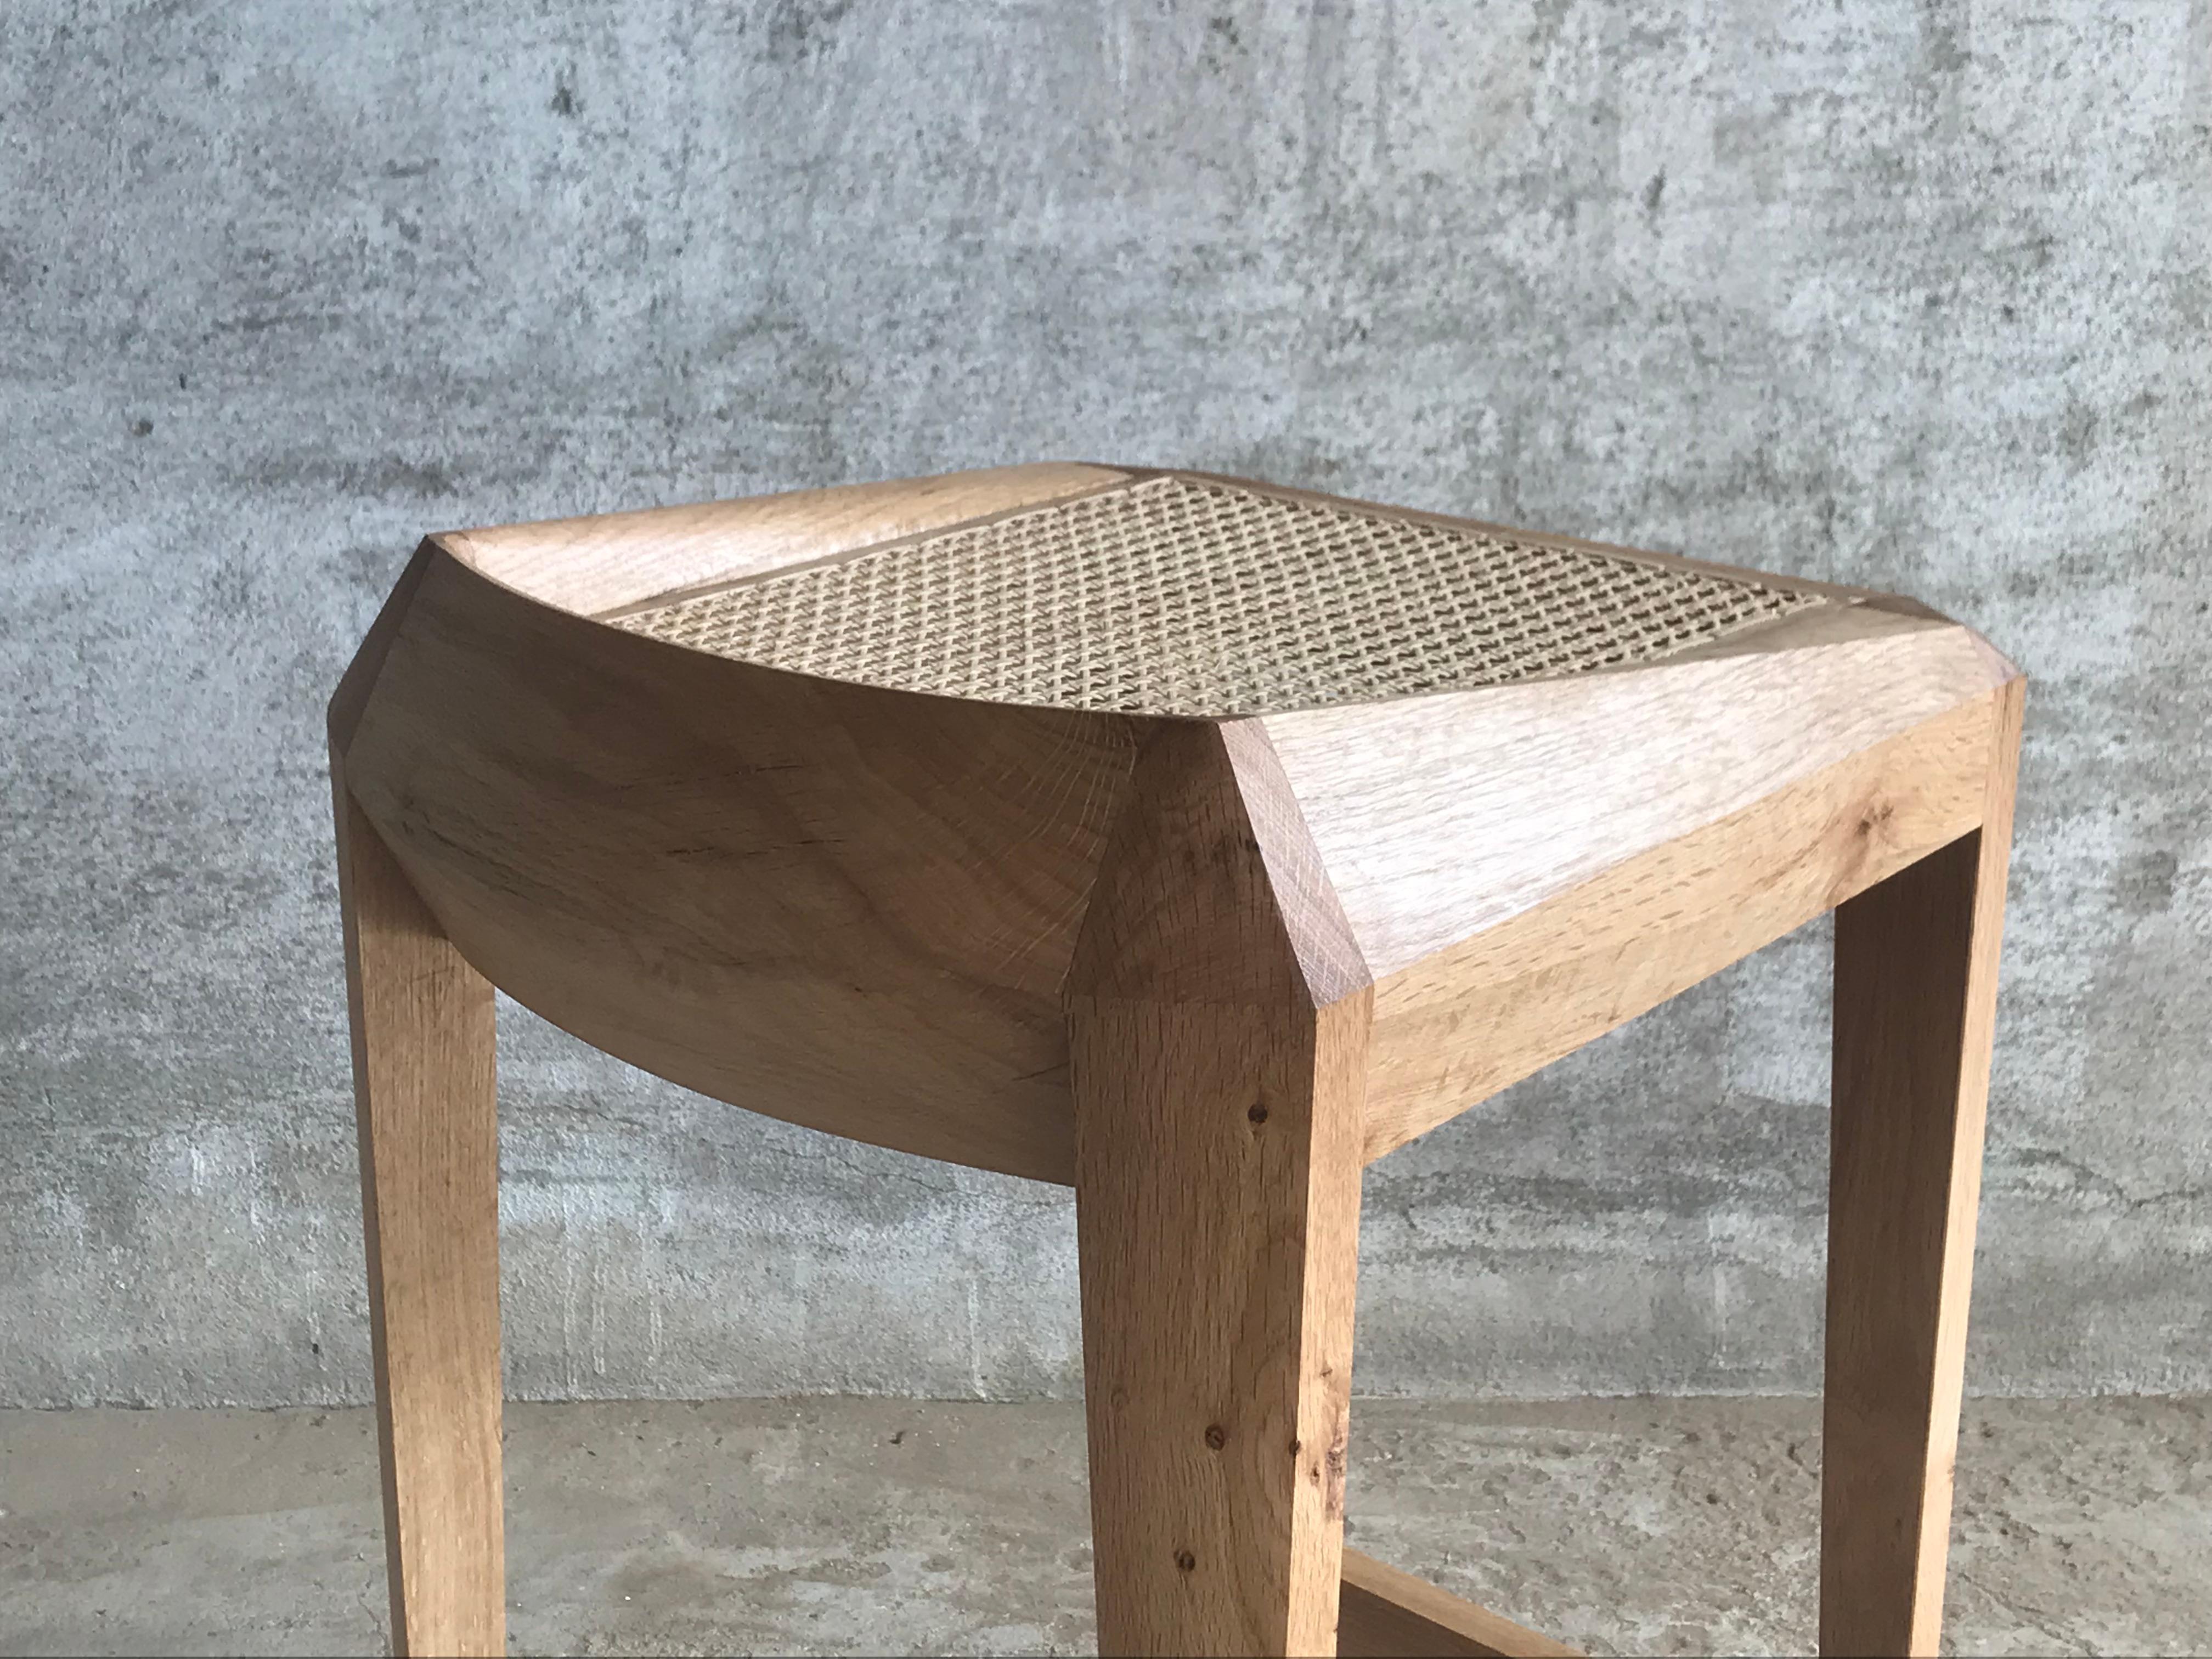 KD Stool a Sculptural Rattan Weaved Top Bar Stool by Tomaz Viana In New Condition For Sale In Cascais, PT